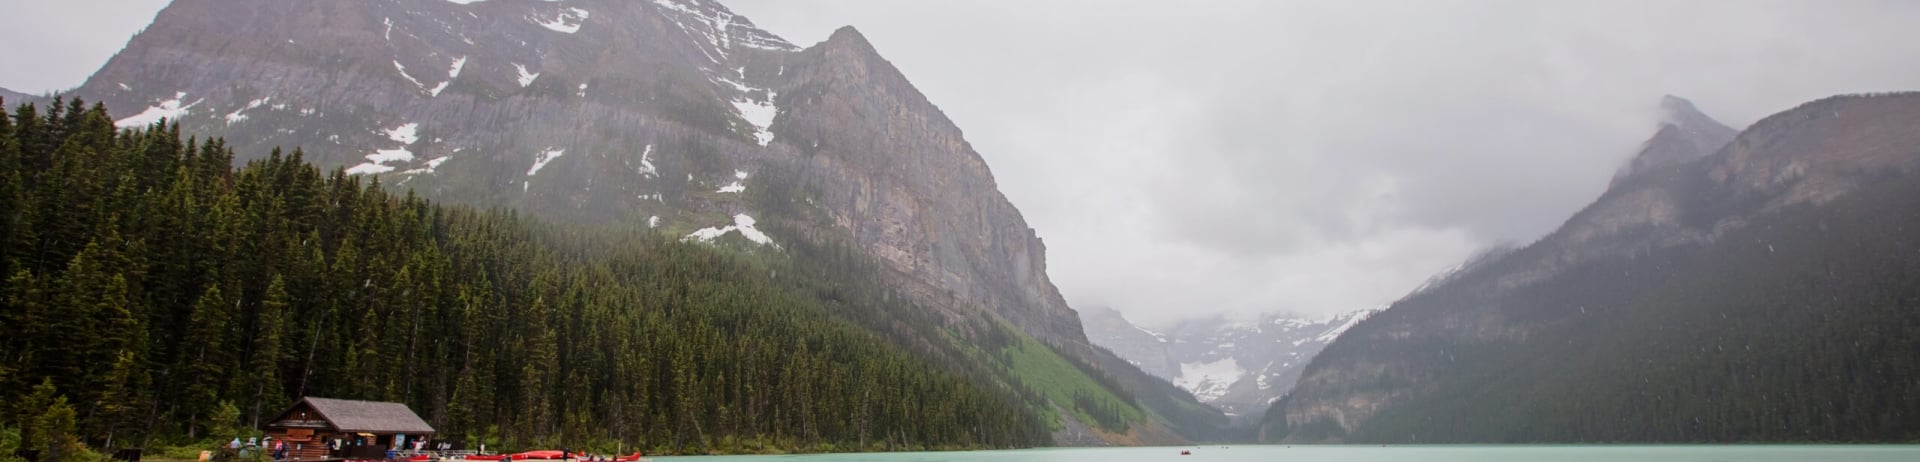 How to spend a day in Lake Louise